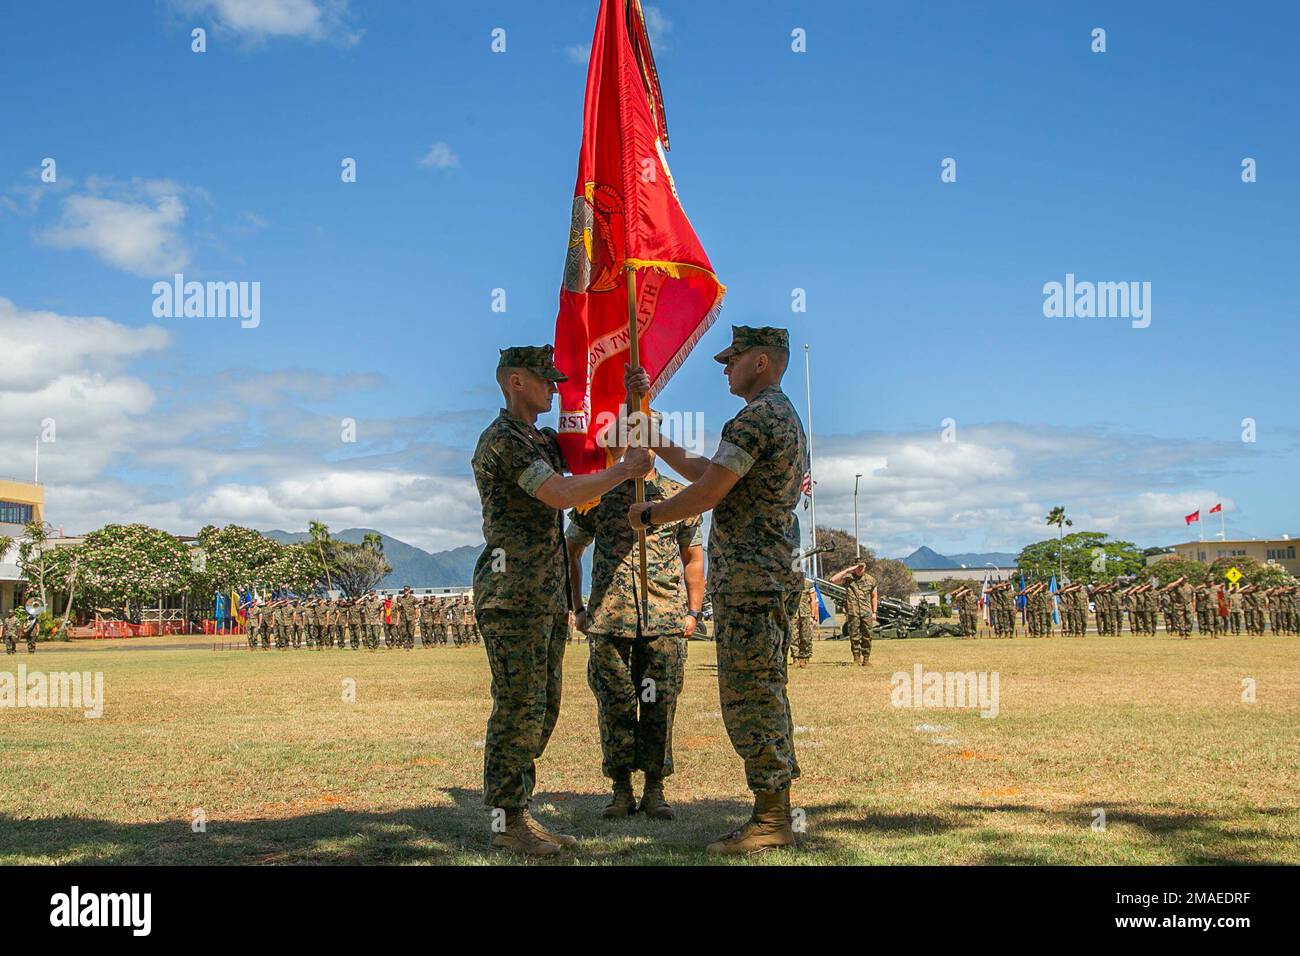 U.S. Marine Corps Lt. Col. Richard Neikirk, outgoing commanding officer, 1st Battalion, 12th Marine Regiment, passes the colors to Lt. Col. Joseph Gill II, incoming commanding officer, during the unit’s change of command ceremony on Marine Corps Base Hawaii, May 26, 2022. This tradition represents the passing of command from one leader to another. Stock Photo